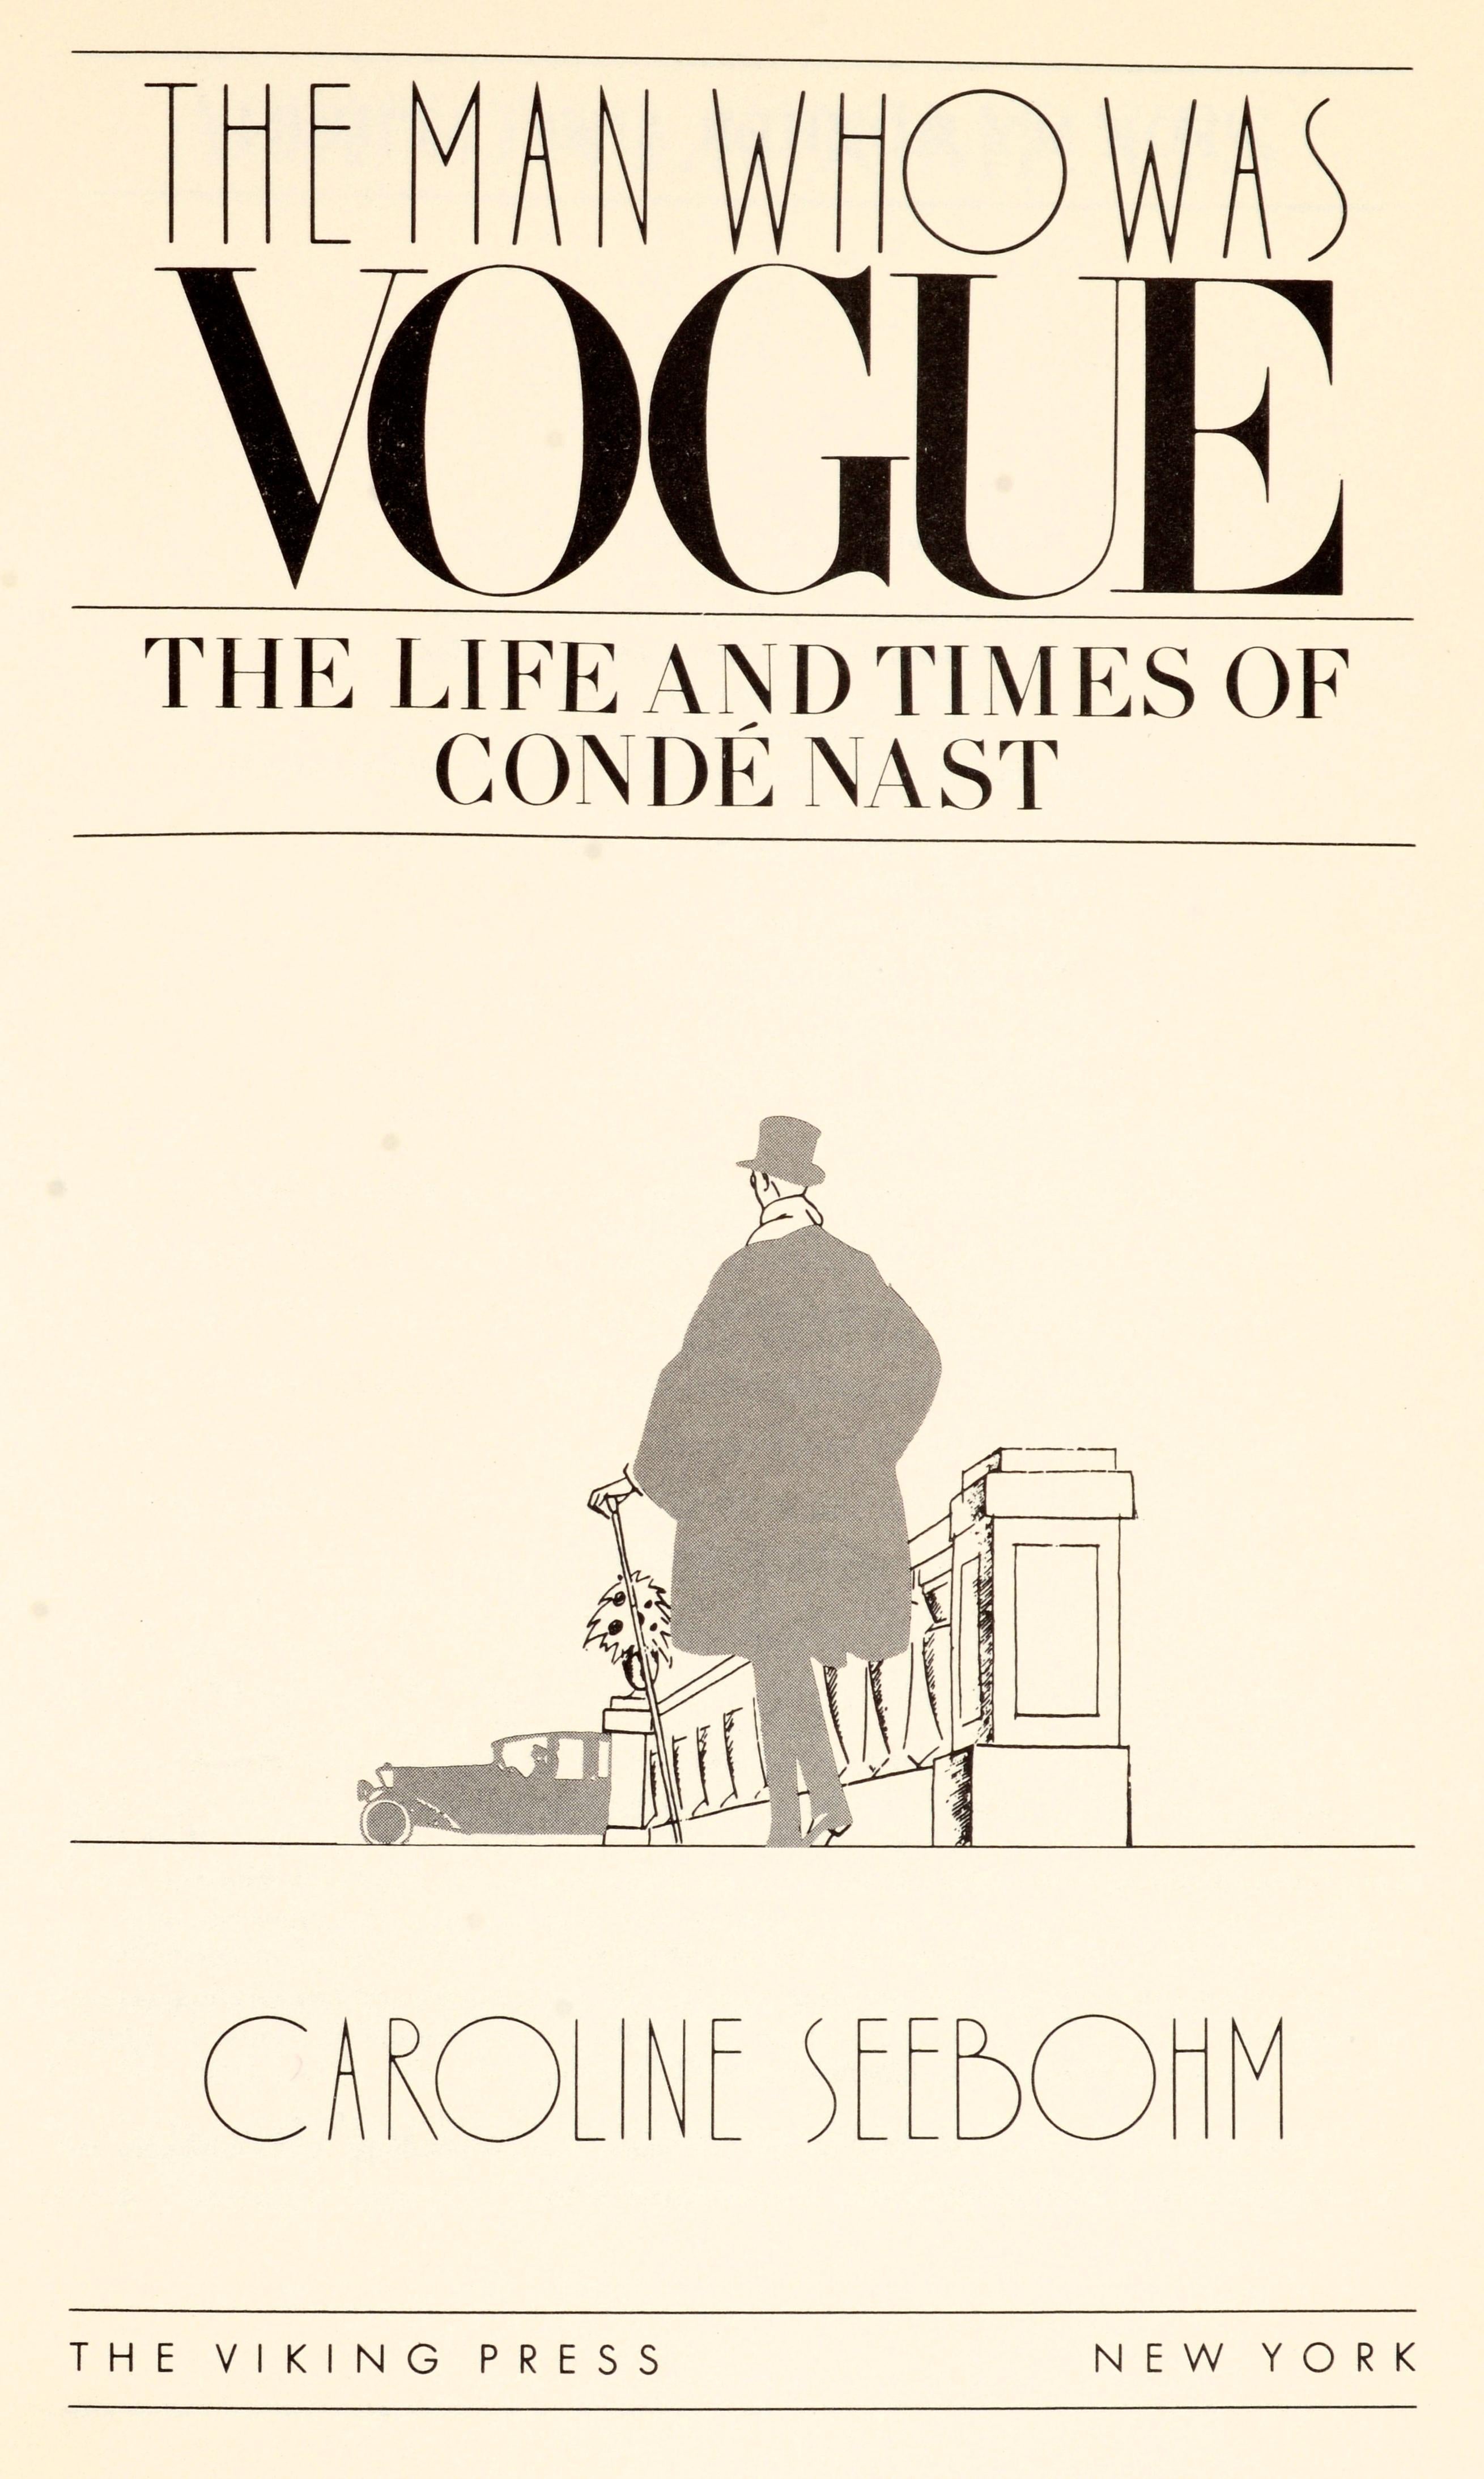 The Man Who Was Vogue: The Life and Times of Conde Nast, by Caroline Seebohm. Published by The Viking Press, NY, 1982. 1st Ed hardcover with dust jacket. Employing personal recollections and confidential company archives to reveal the life and times